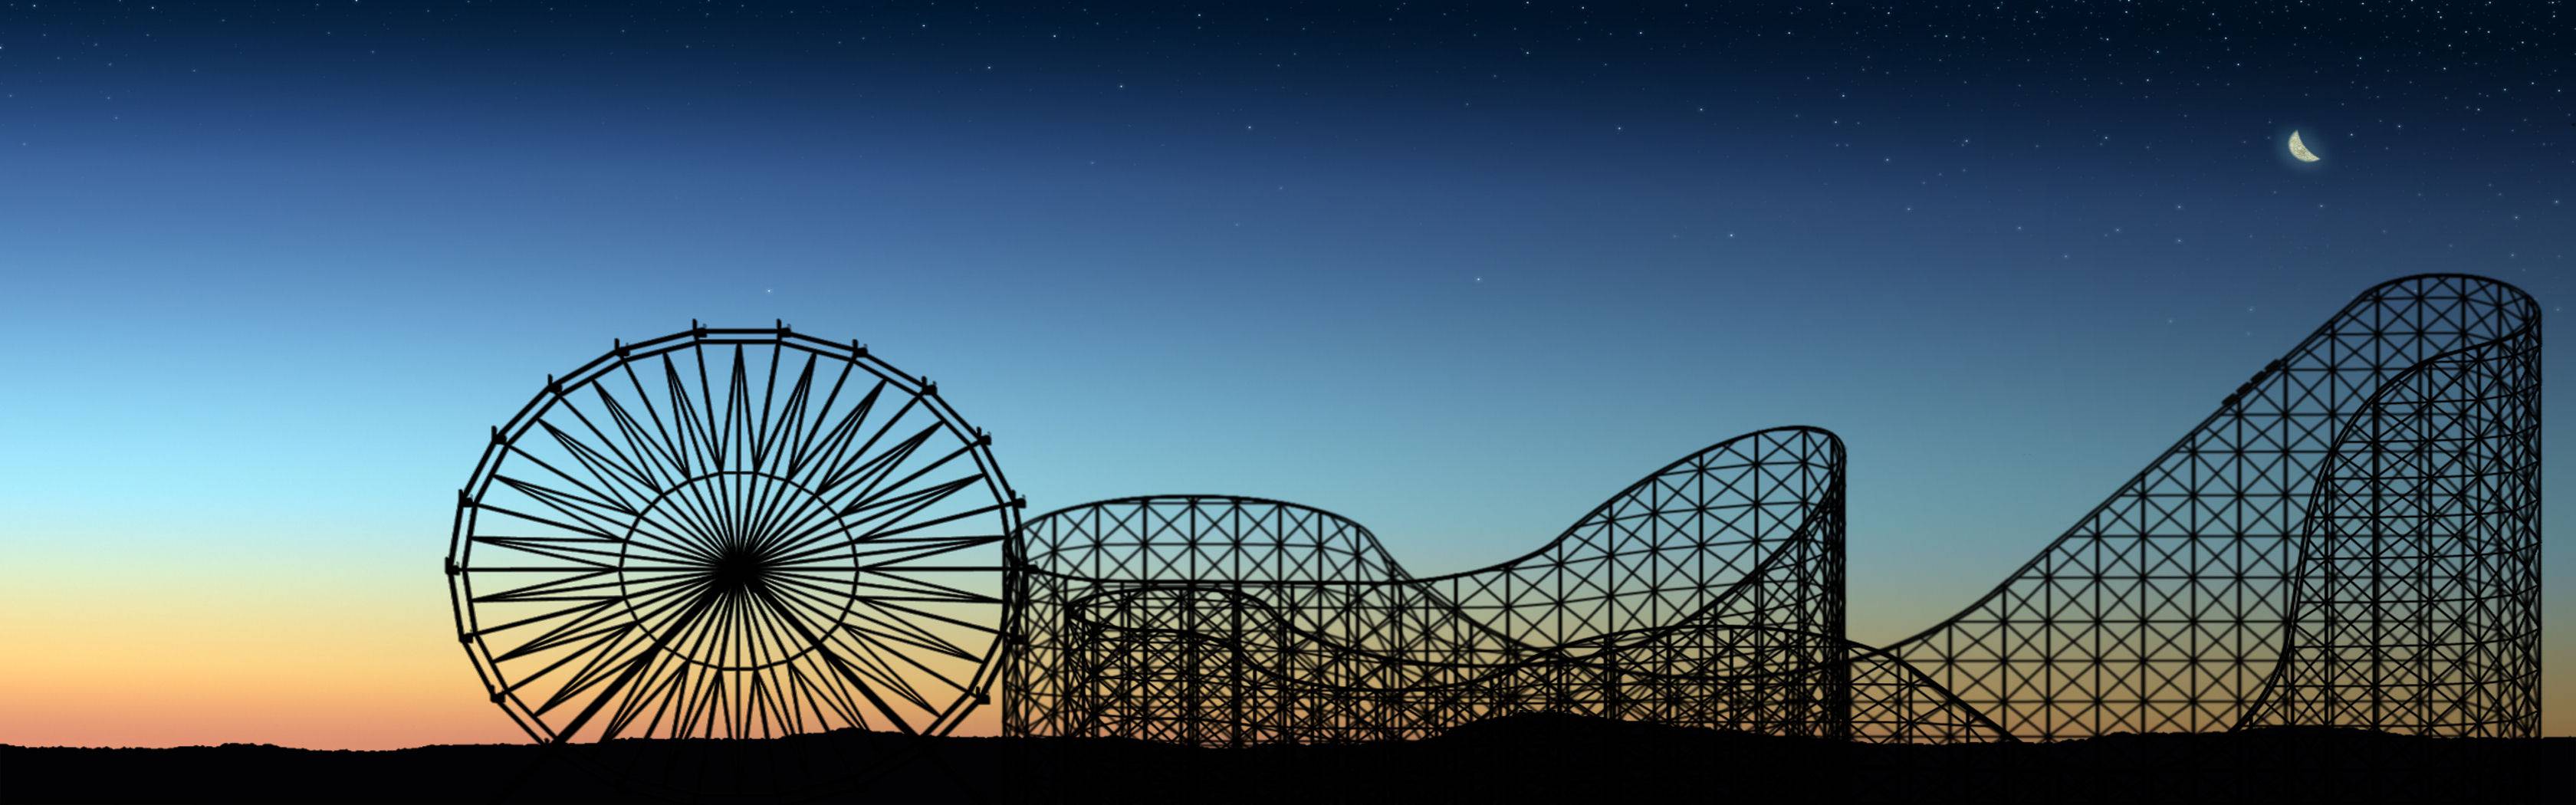 Dual screen roller coaster wallpaper - (#6749) - High Quality and ...